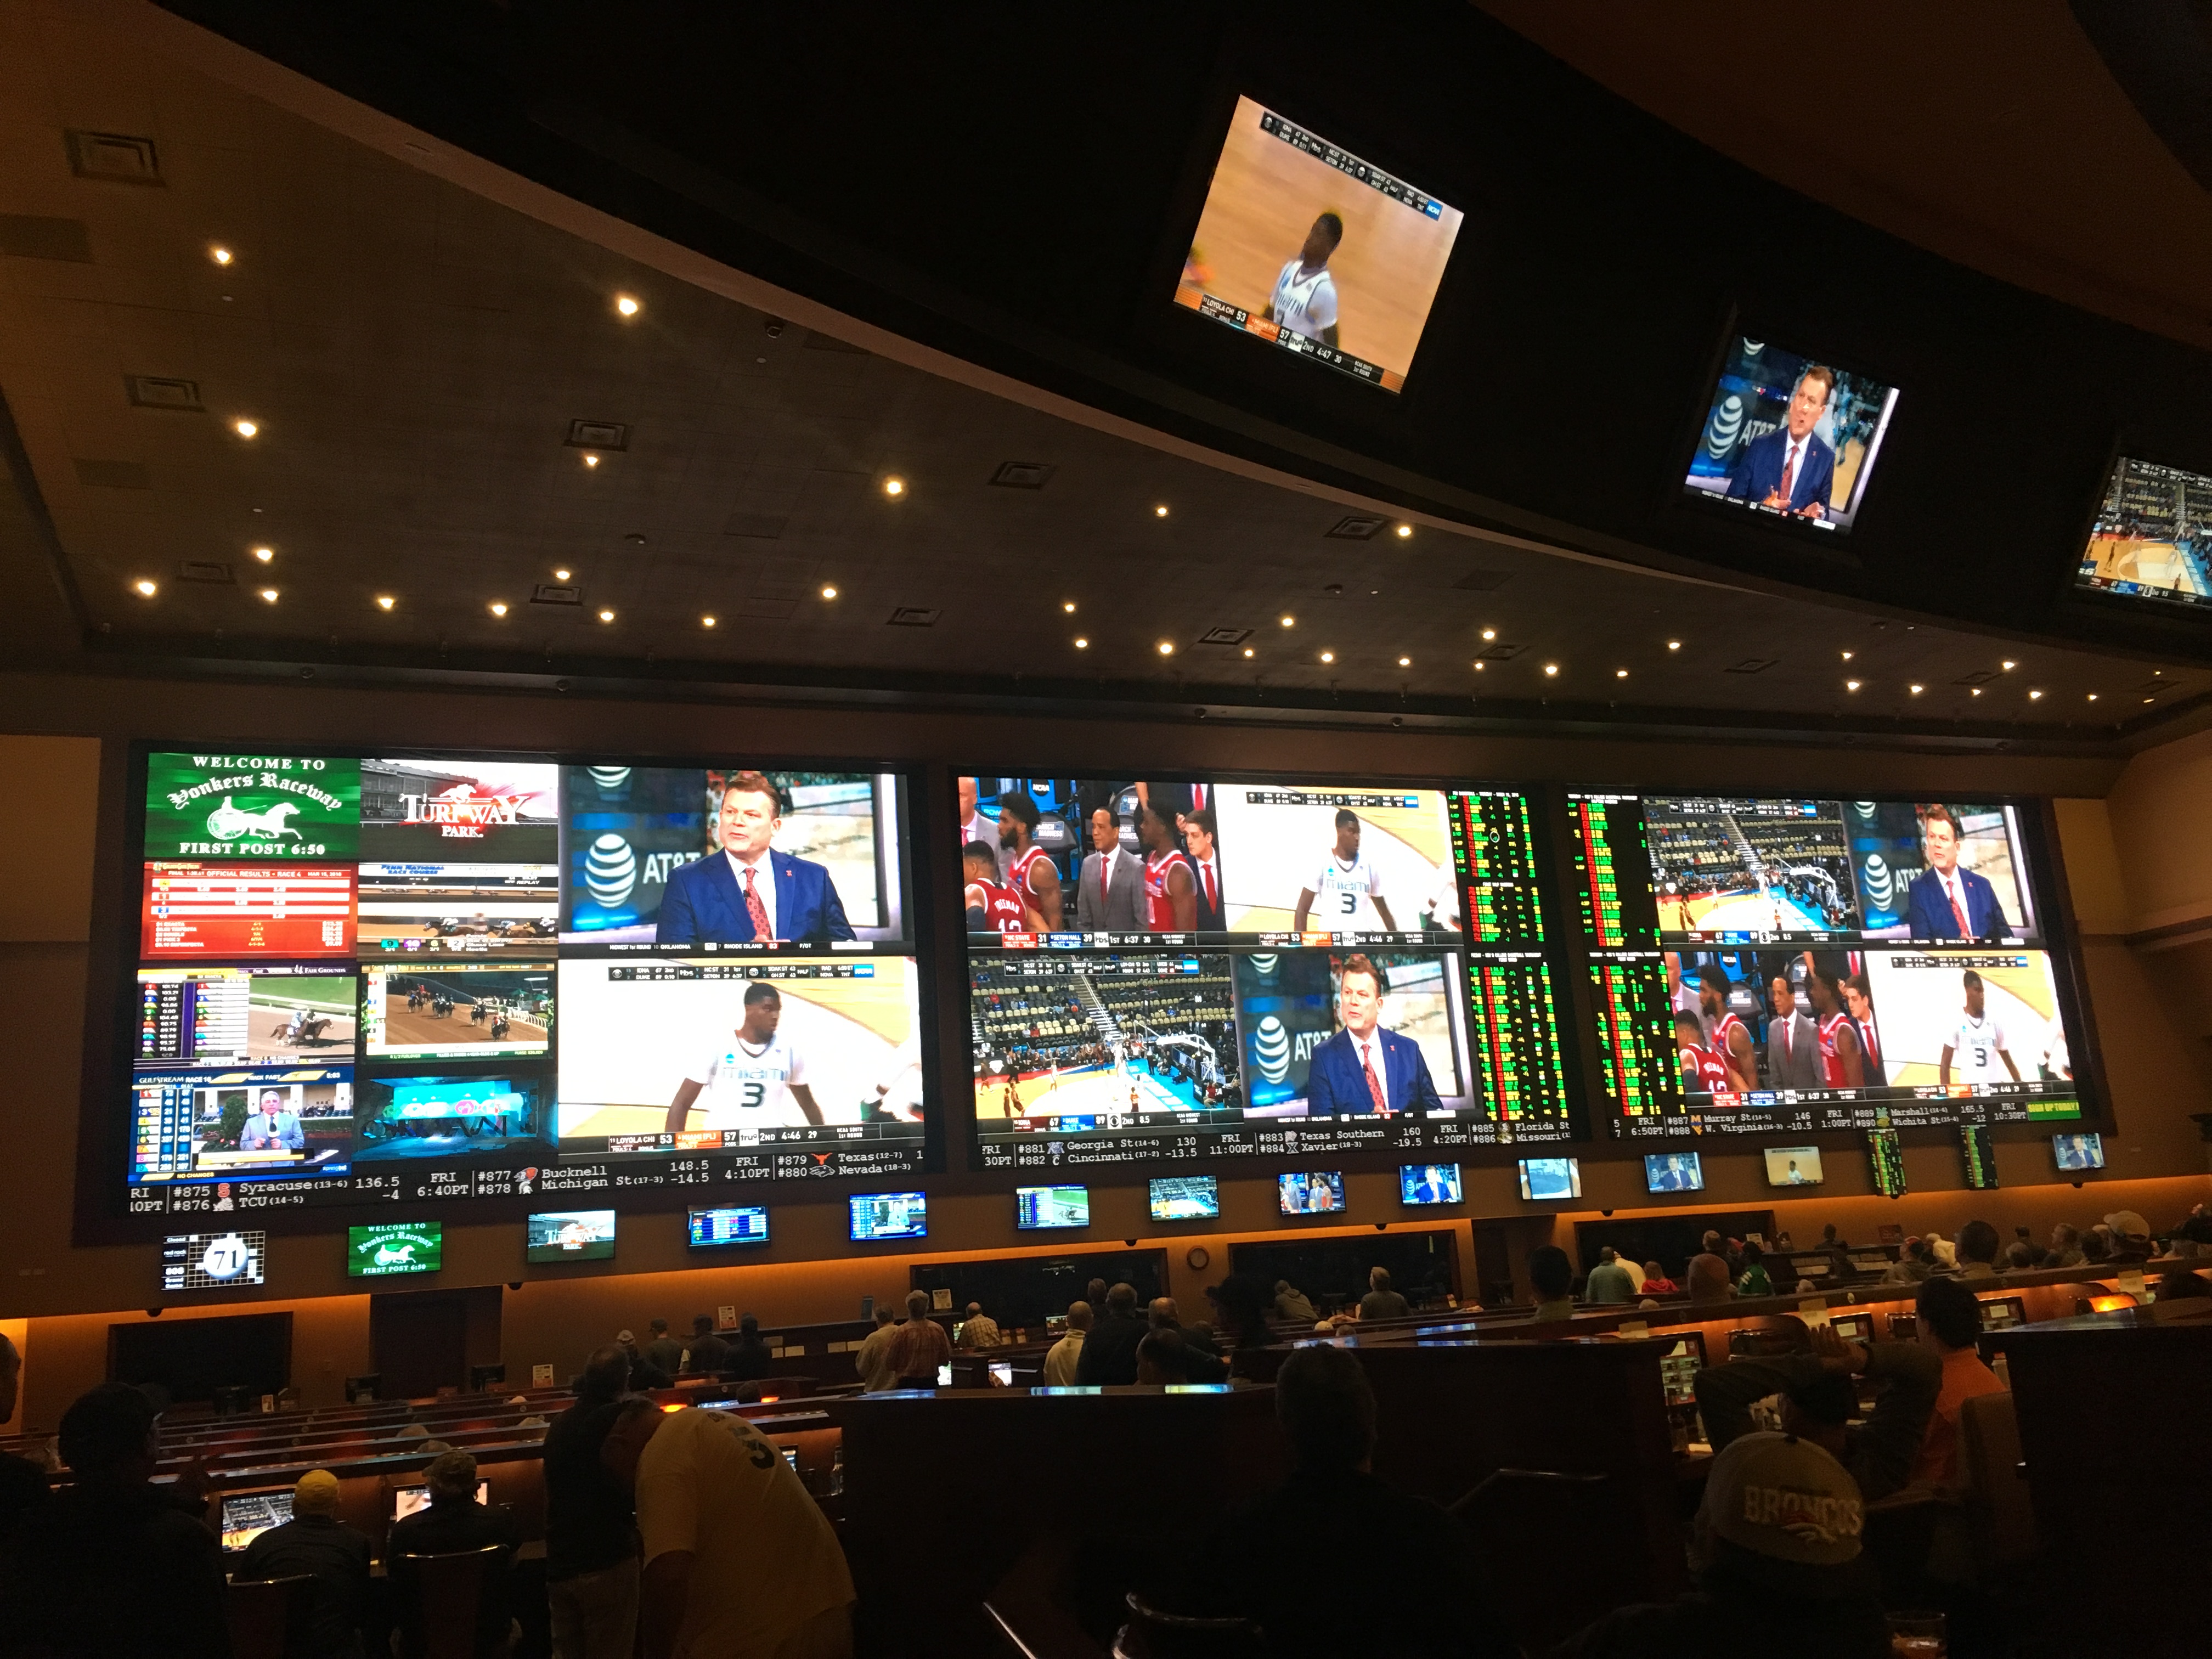 The 10 Best Las Vegas Sportsbooks for Betting on March Madness